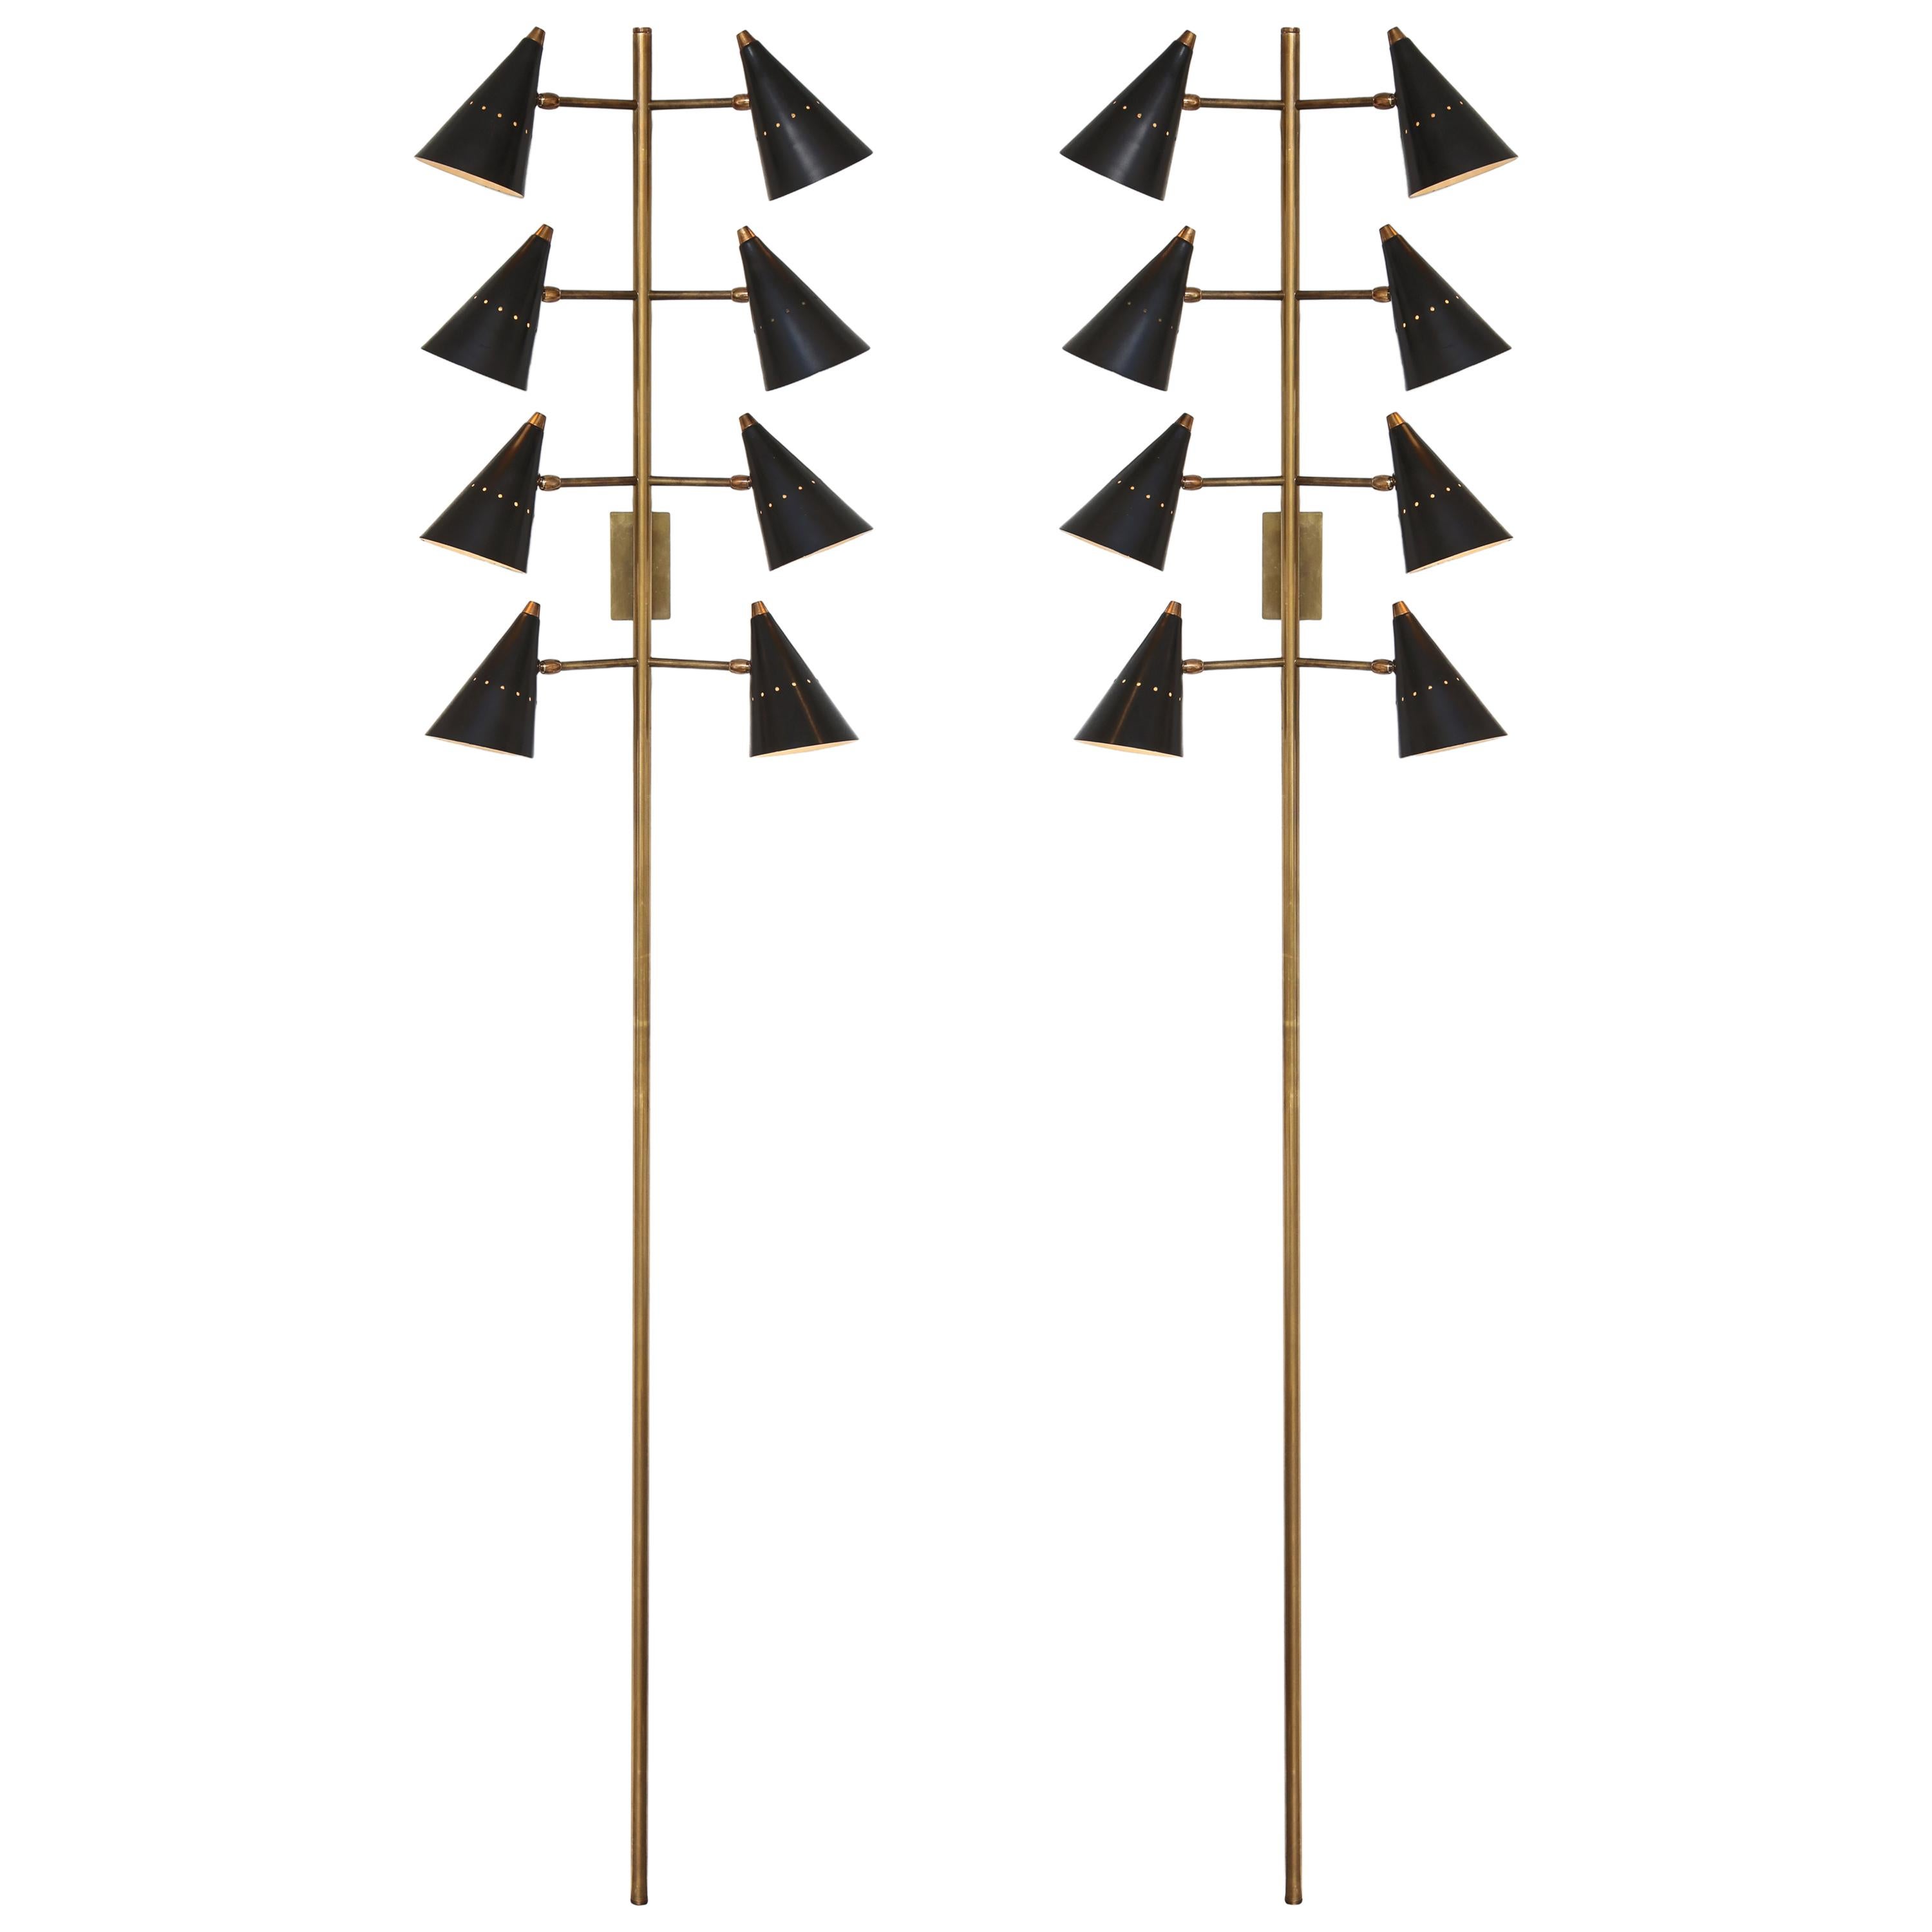 Stilnovo Rare Pair of Tall Eight-Arm Adjustable Wall Lights, Italy, 1950s For Sale